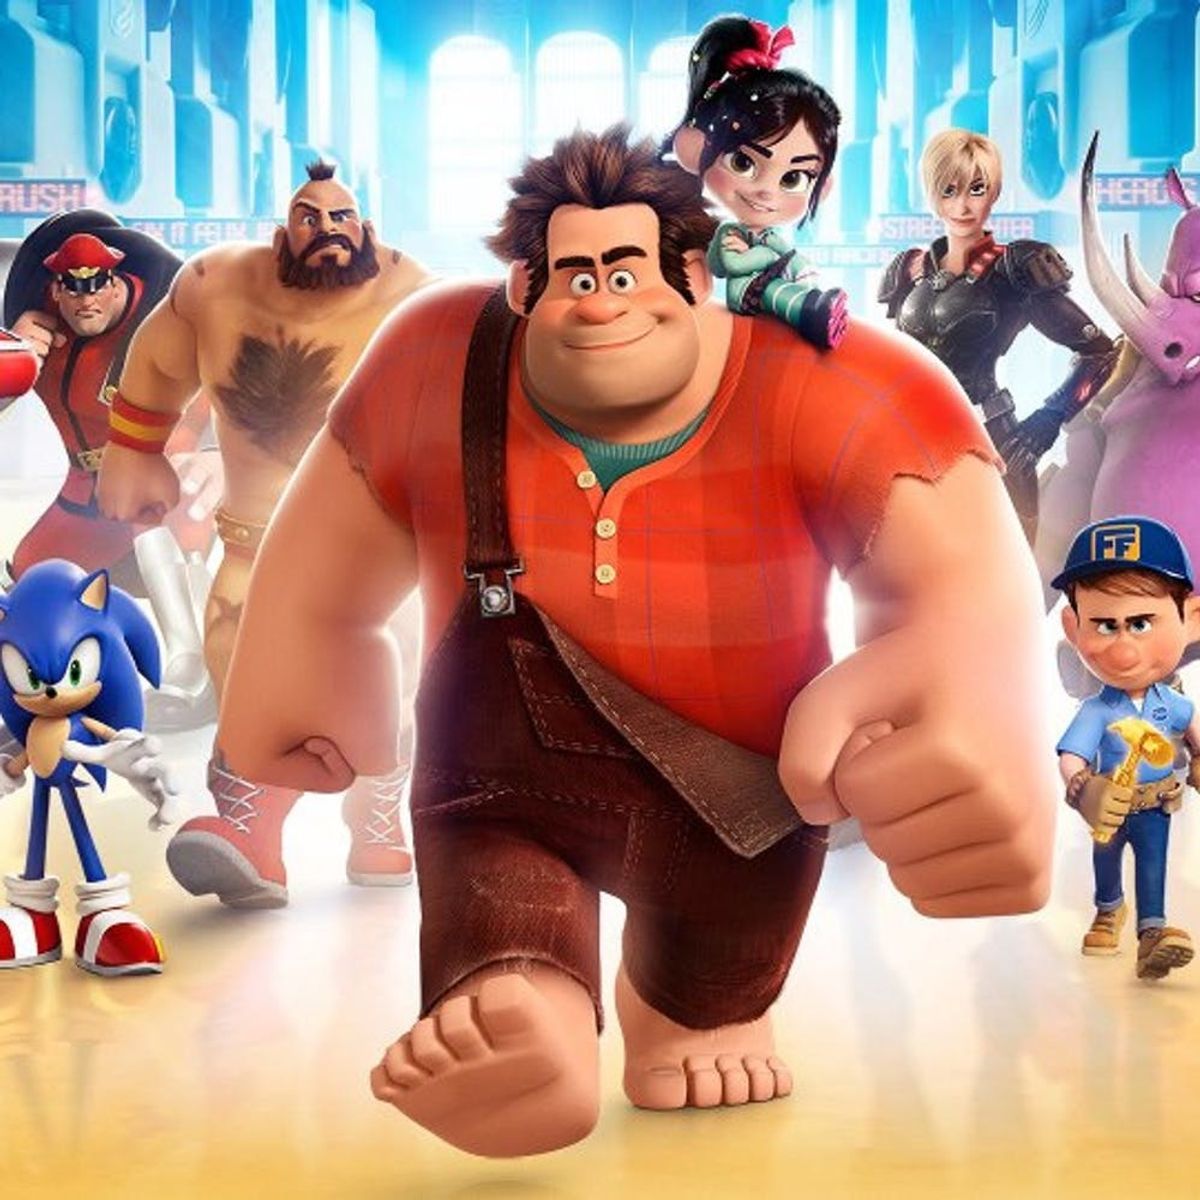 Here Are Some of the Top Secret Deets About Disney’s Wreck-It Ralph 2!